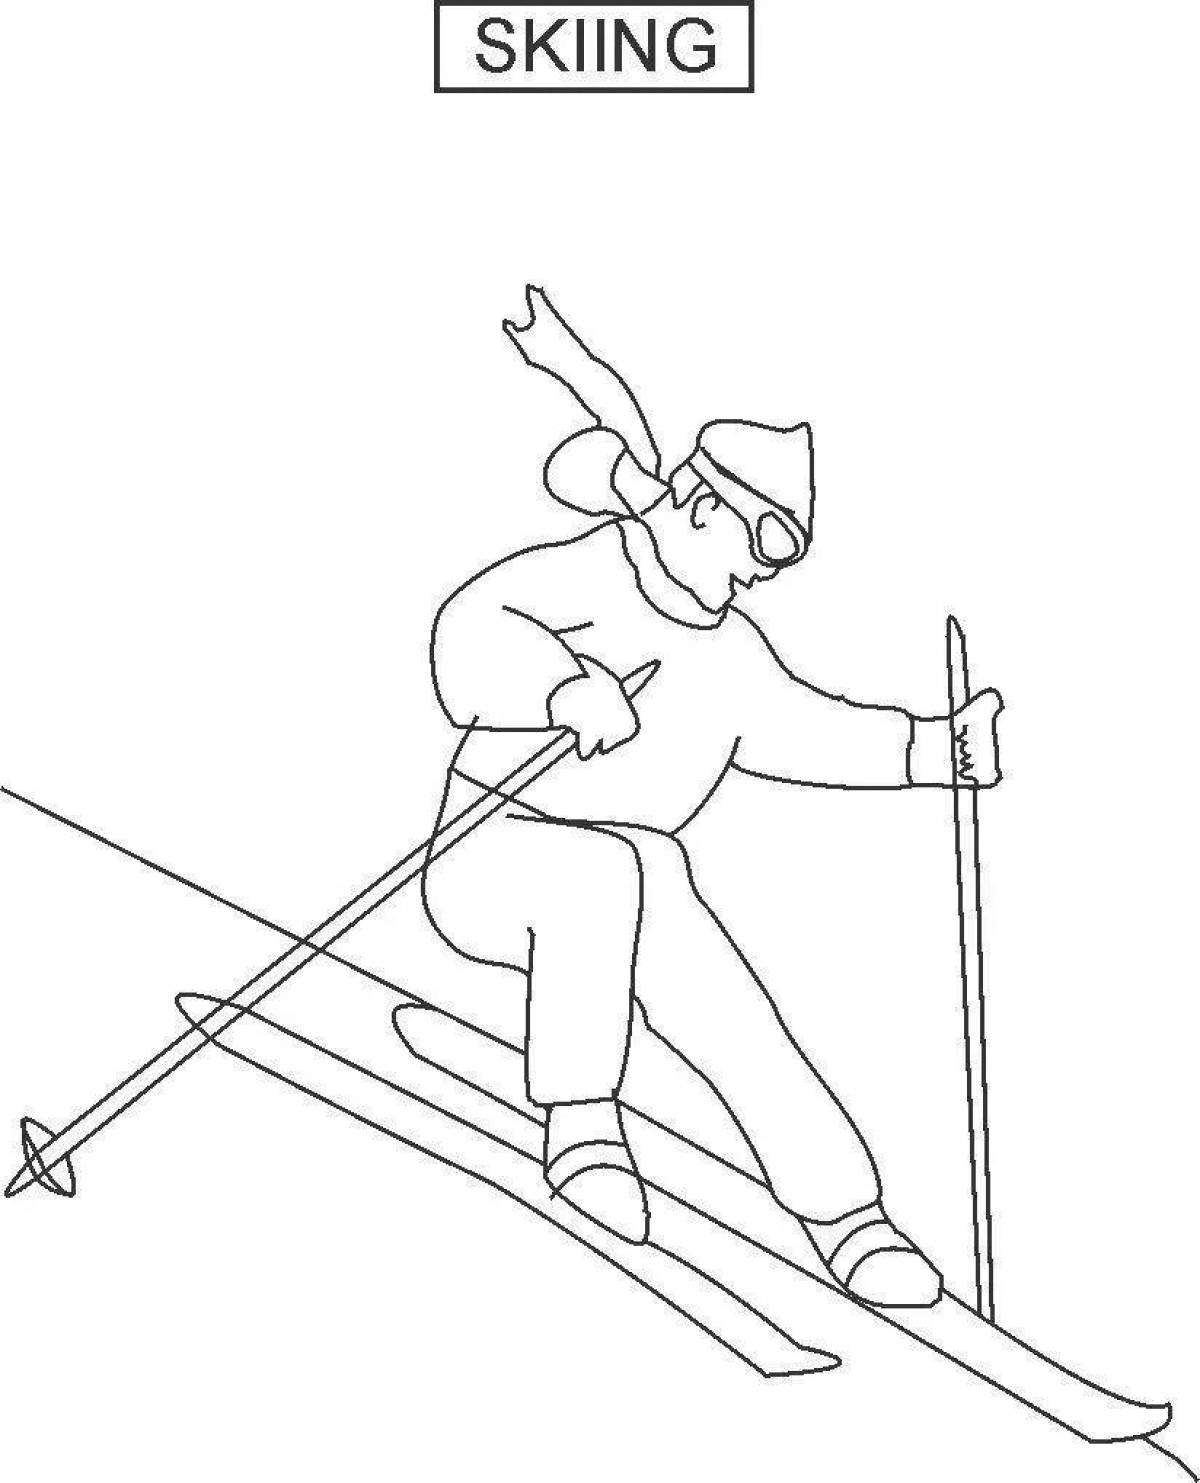 Children's skier coloring pages